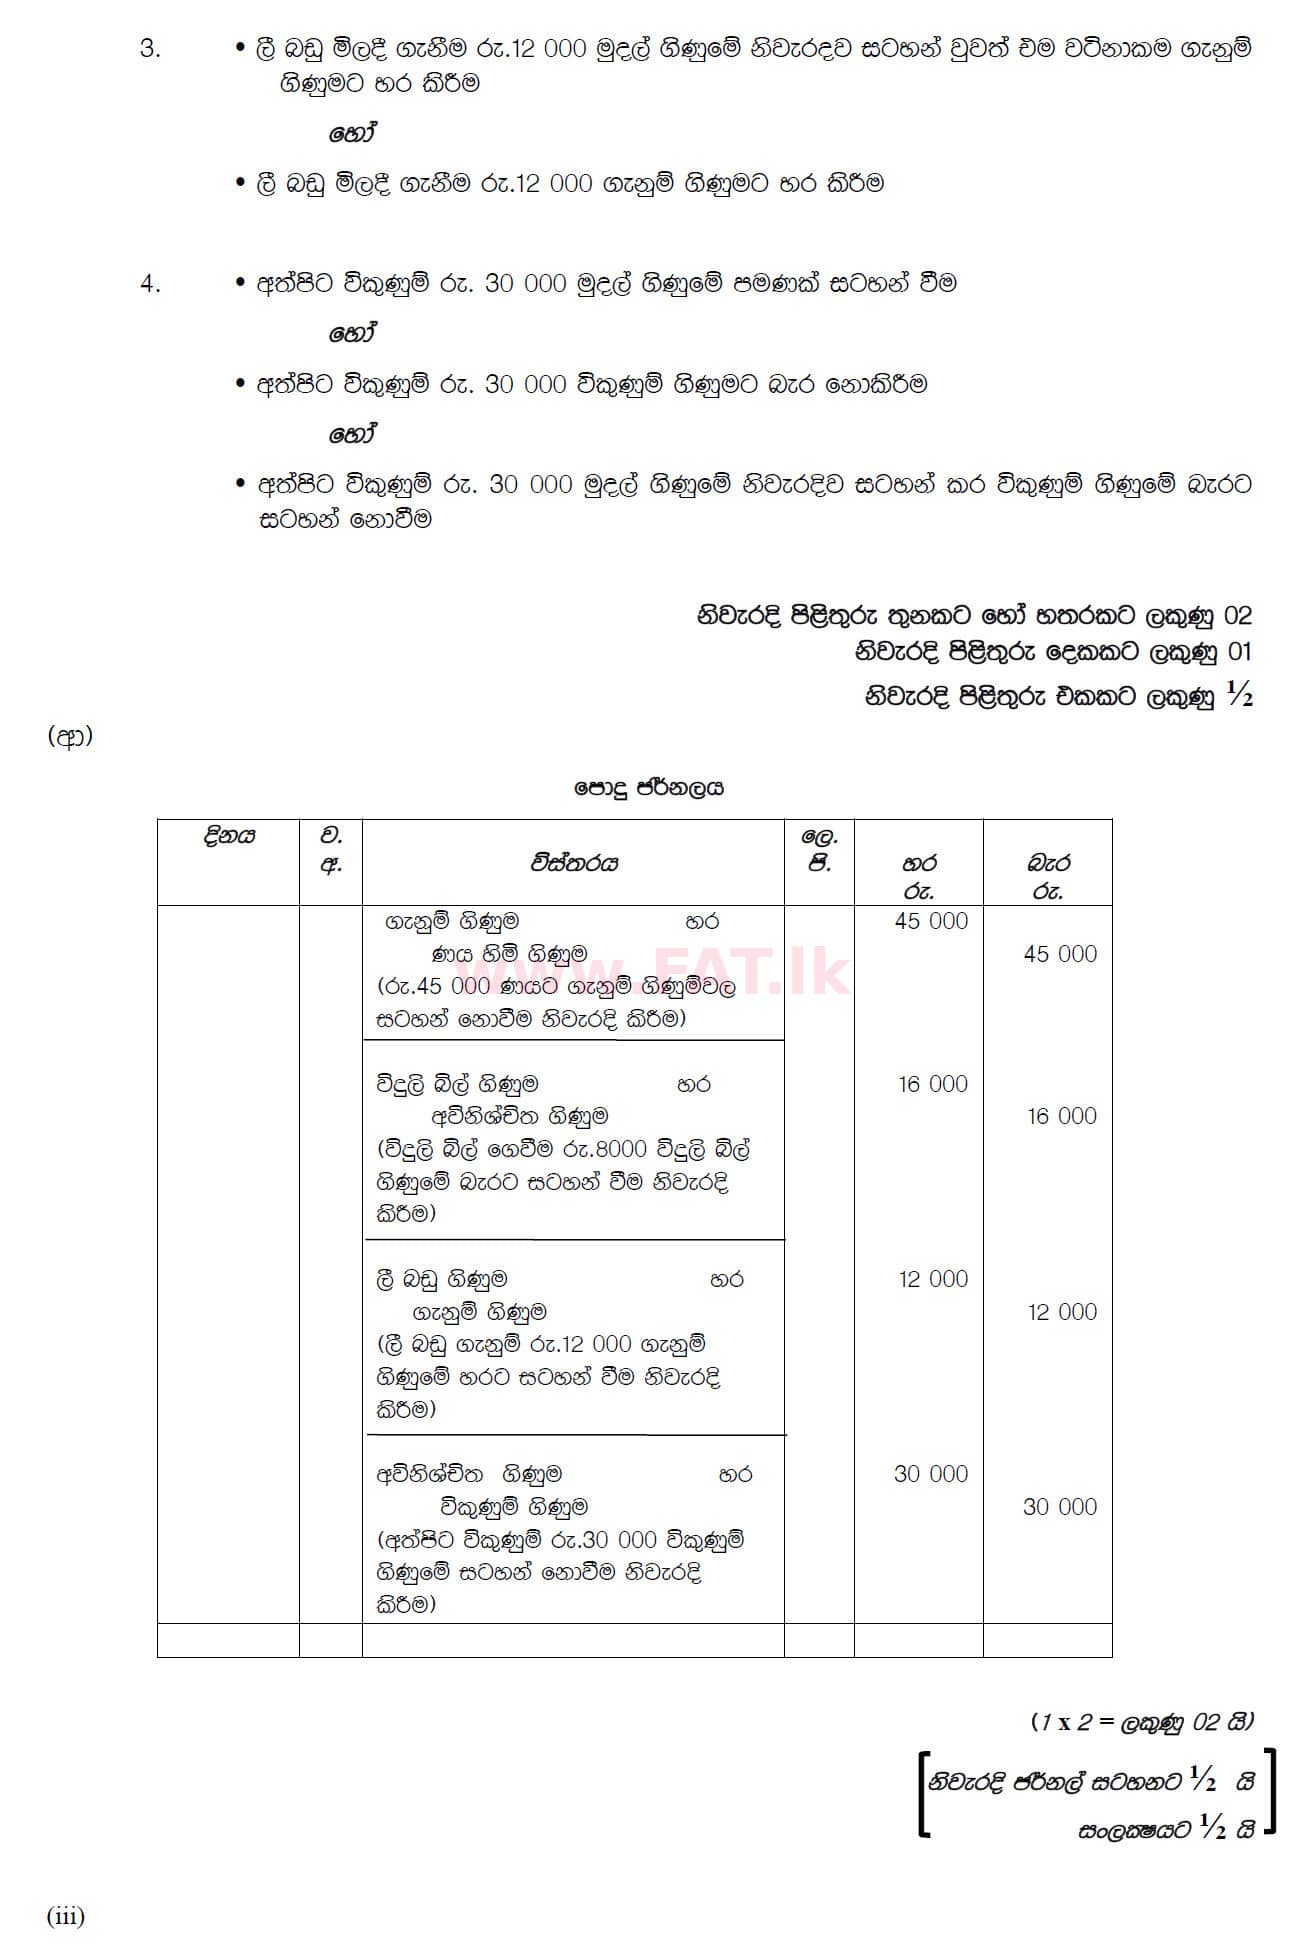 National Syllabus : Ordinary Level (O/L) Business and Accounting Studies - 2019 March - Paper II (සිංහල Medium) 6 5898